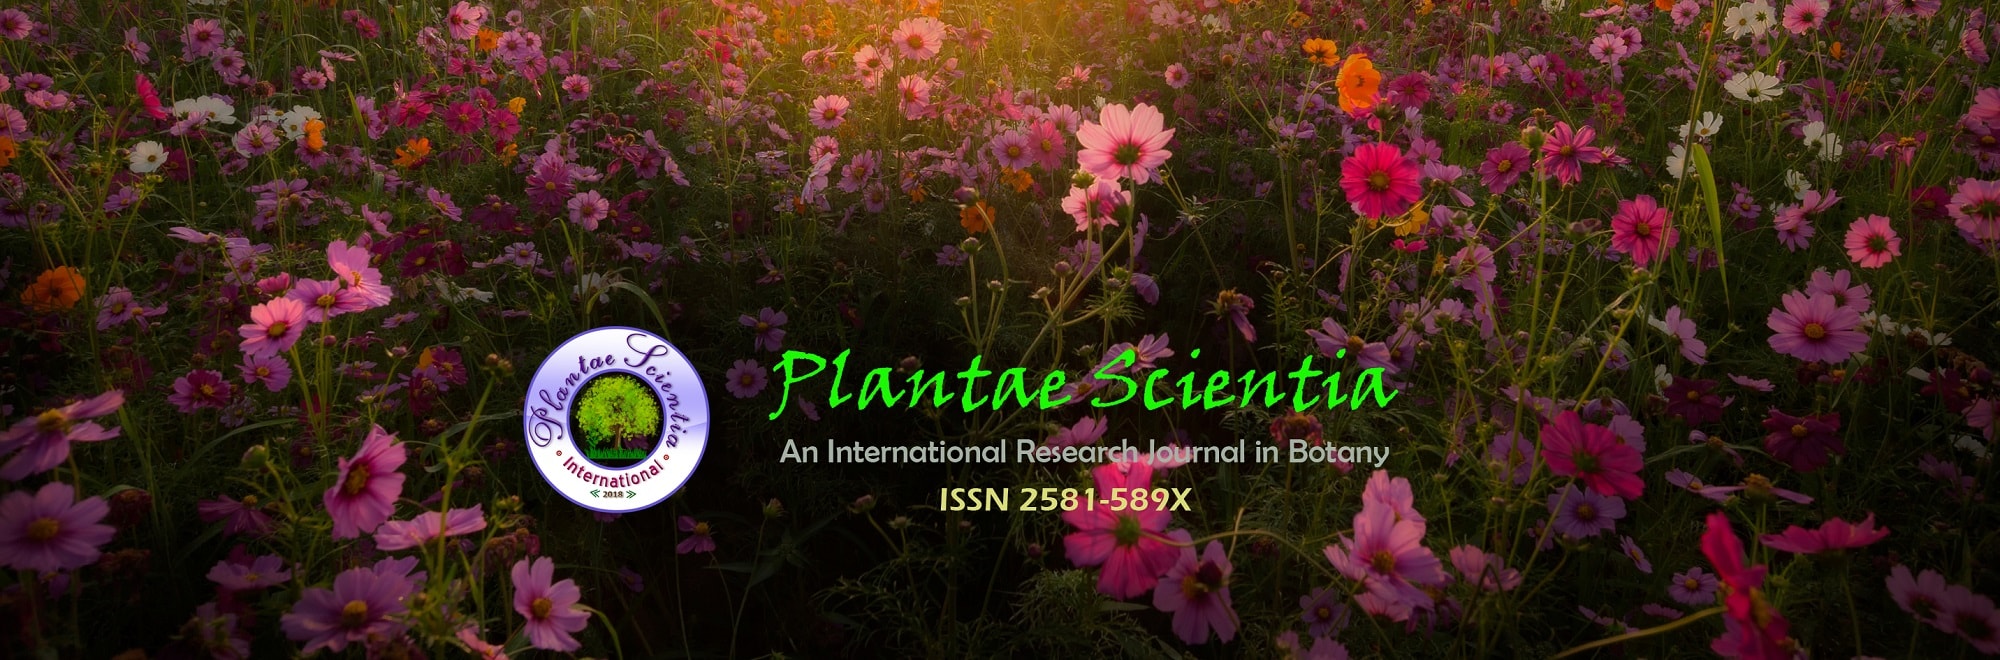 CrossRef indexed international research journal in Botany